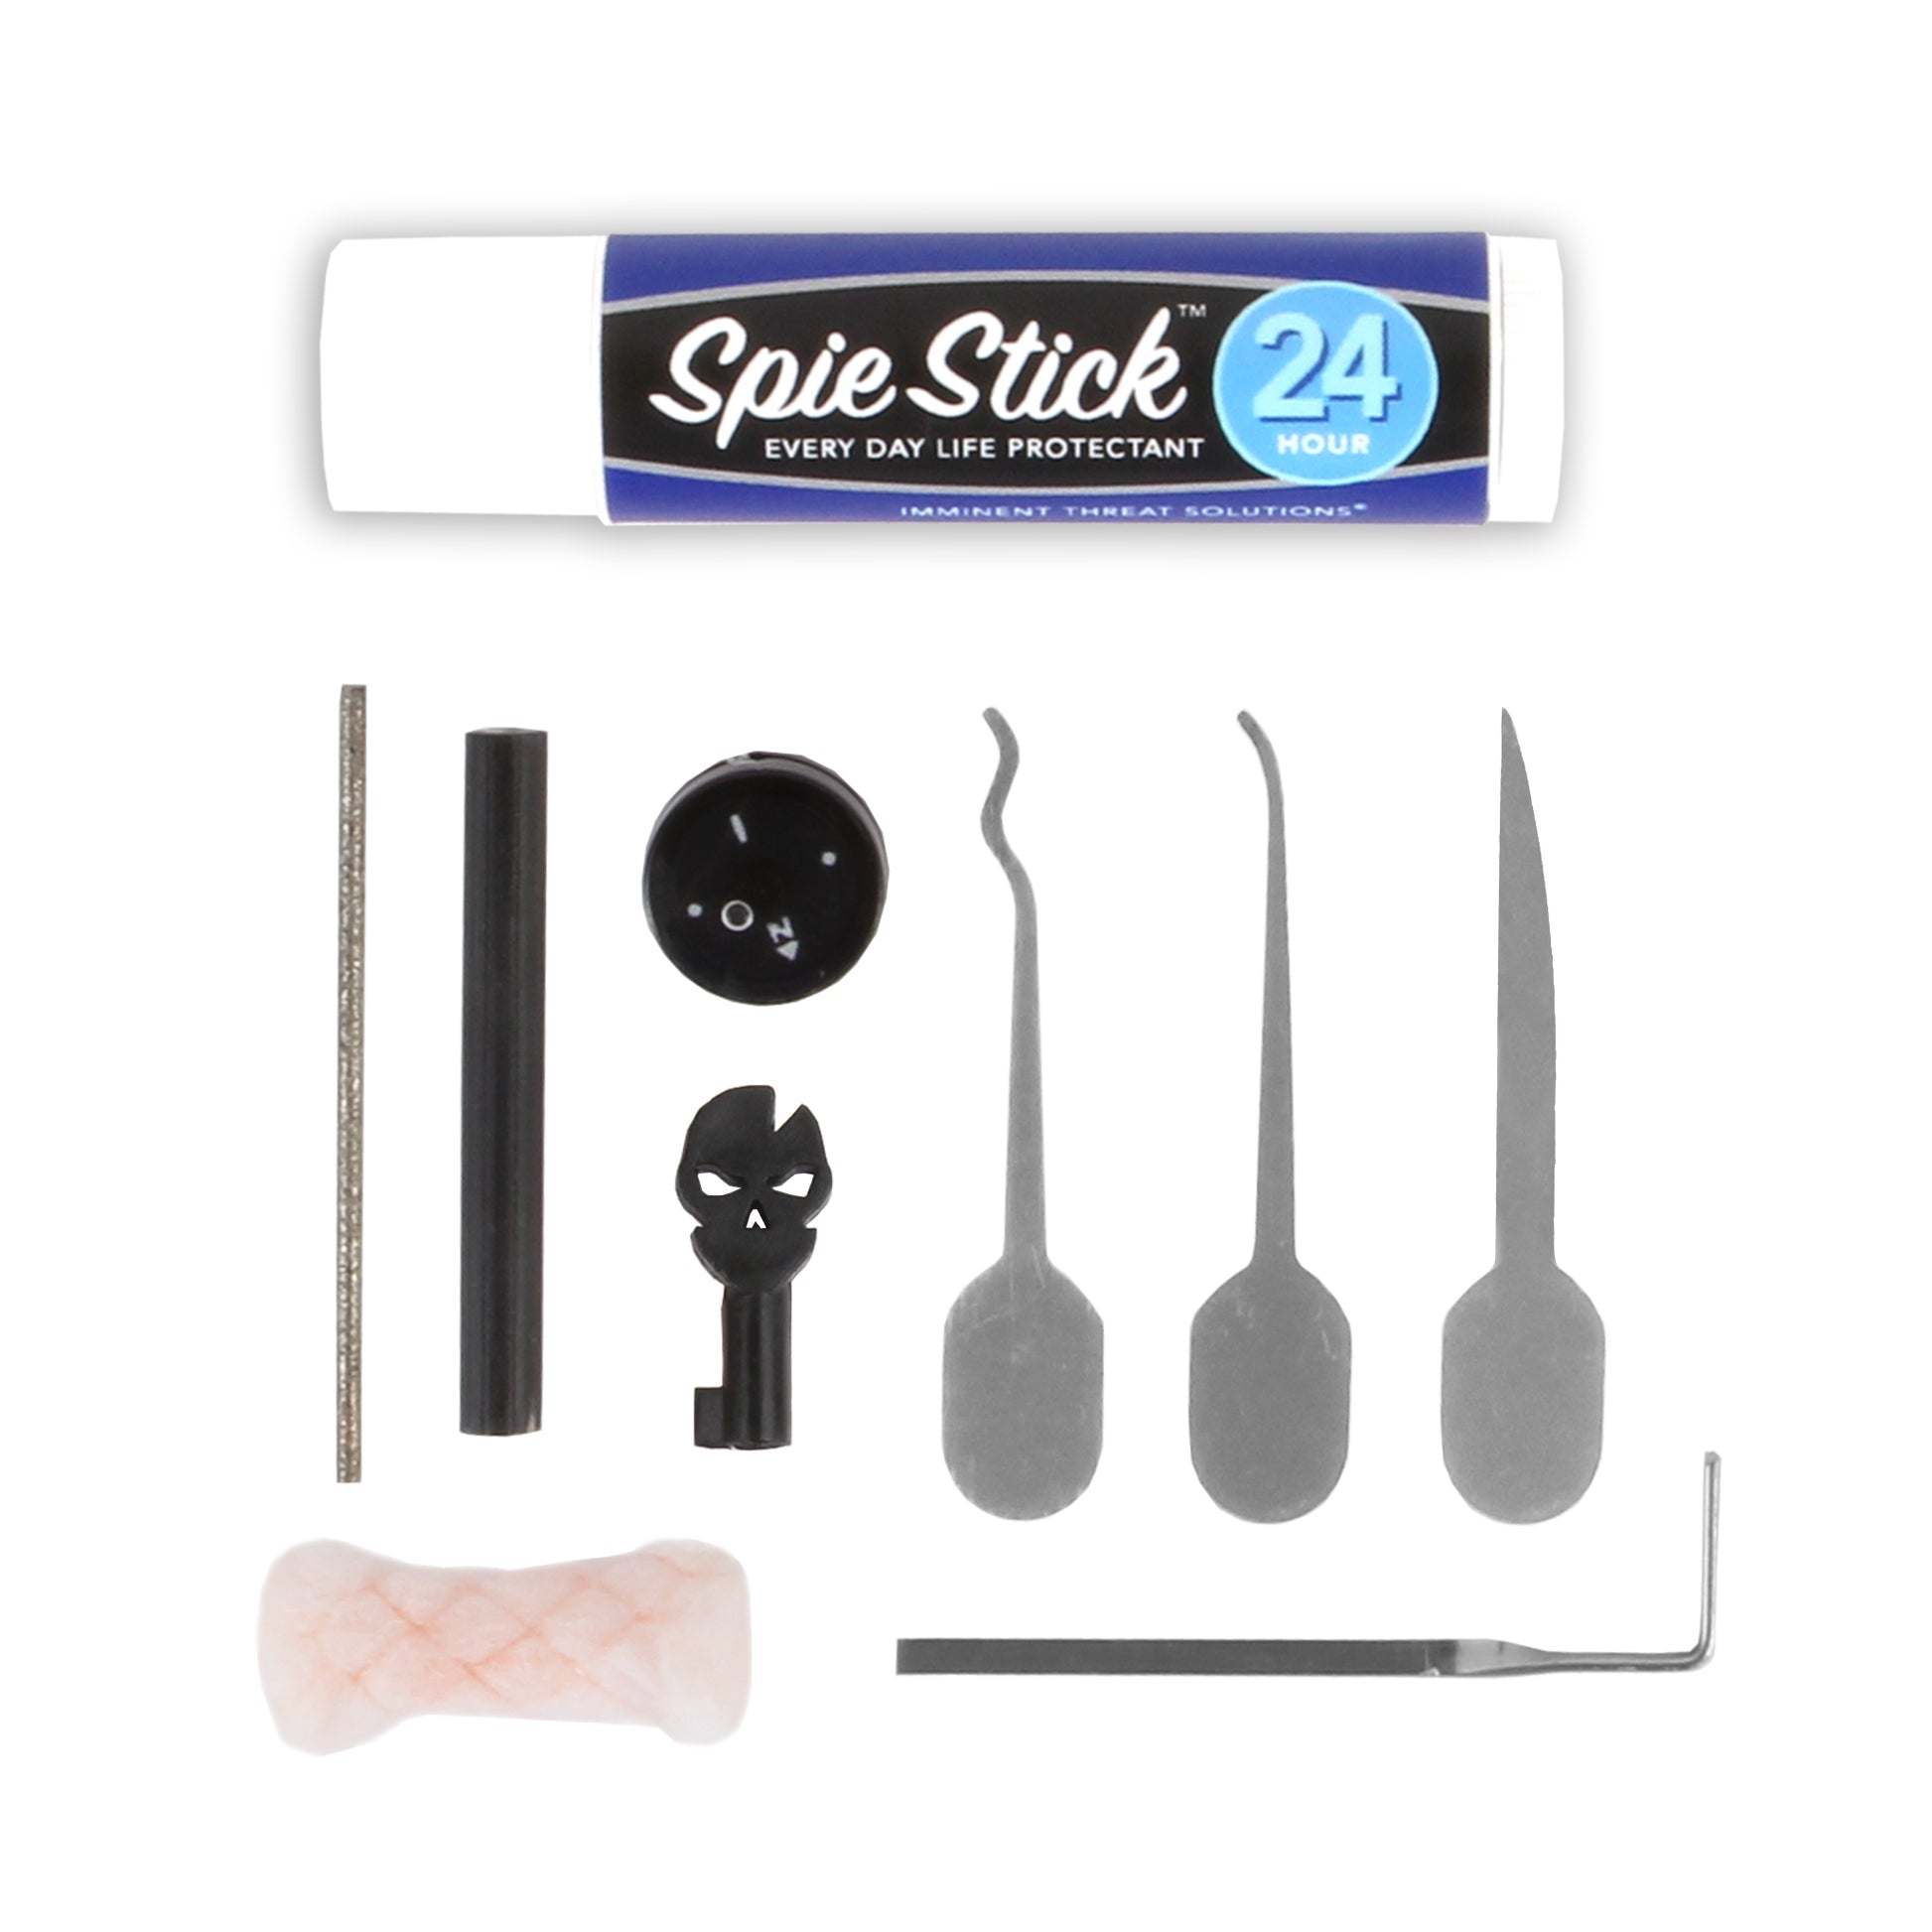 ITS SPIE Stick – ITS Tactical